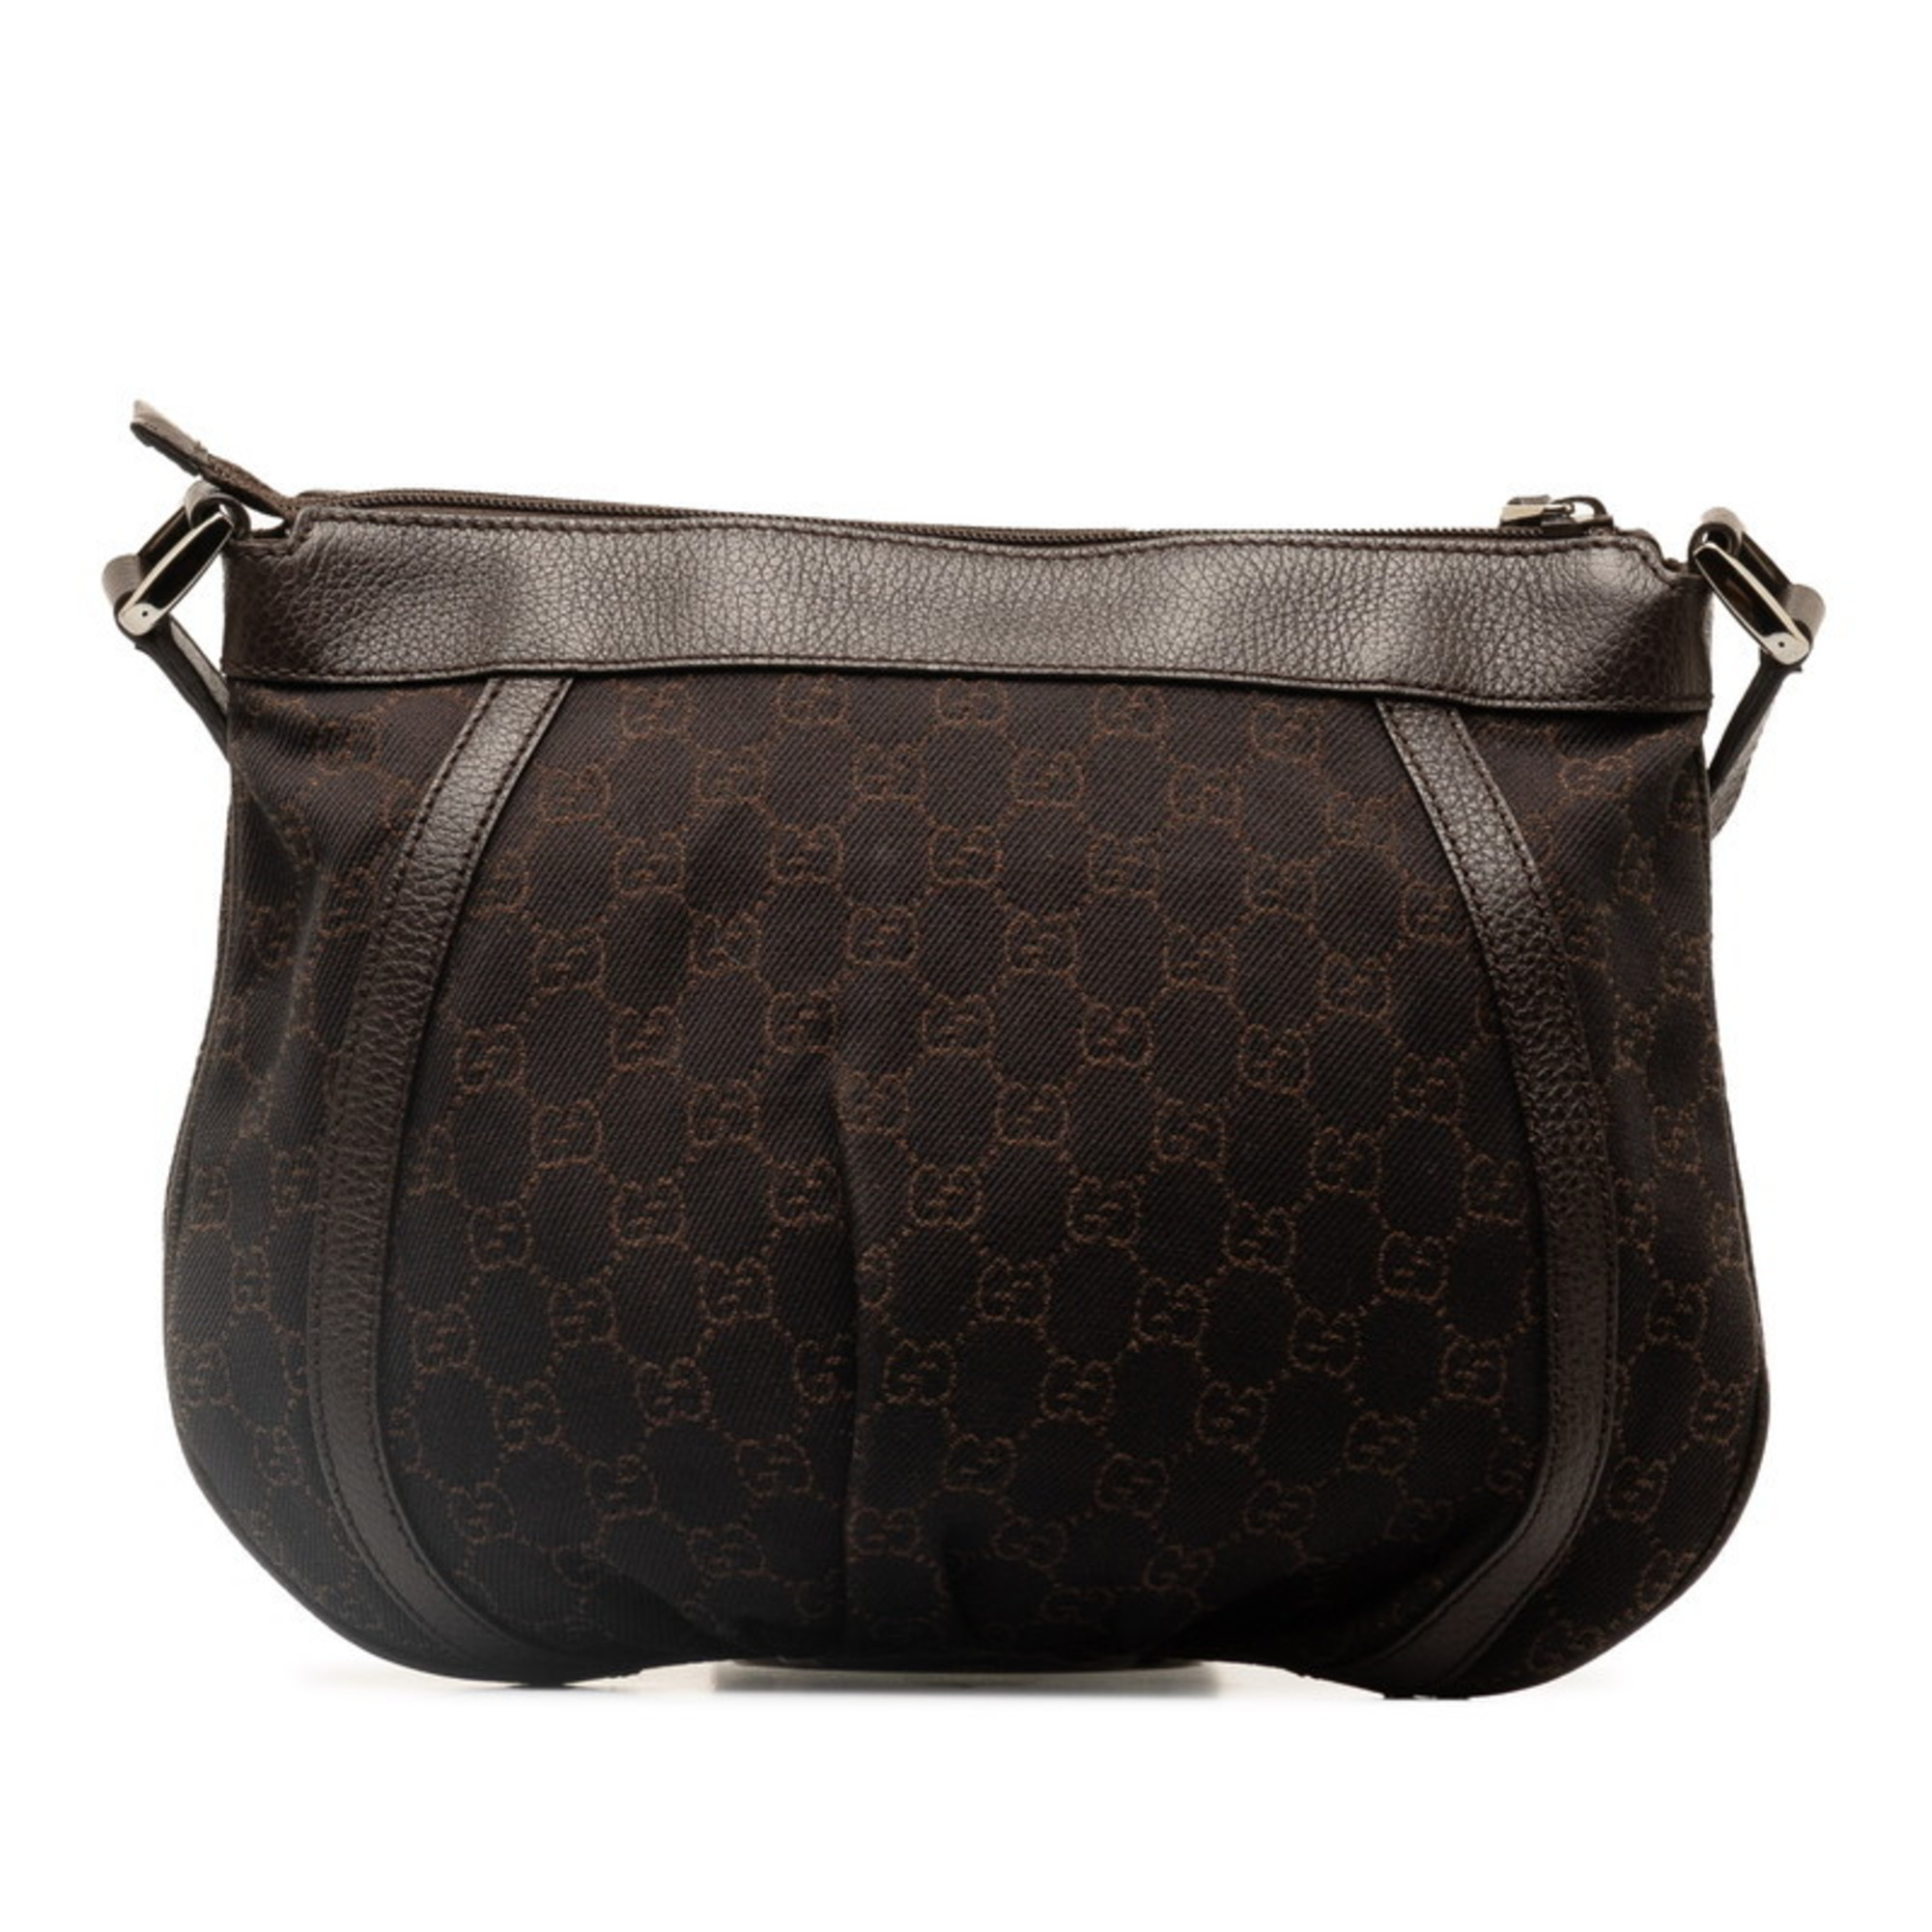 Gucci GG Canvas Abby Shoulder Bag 265691 Brown Leather Women's GUCCI